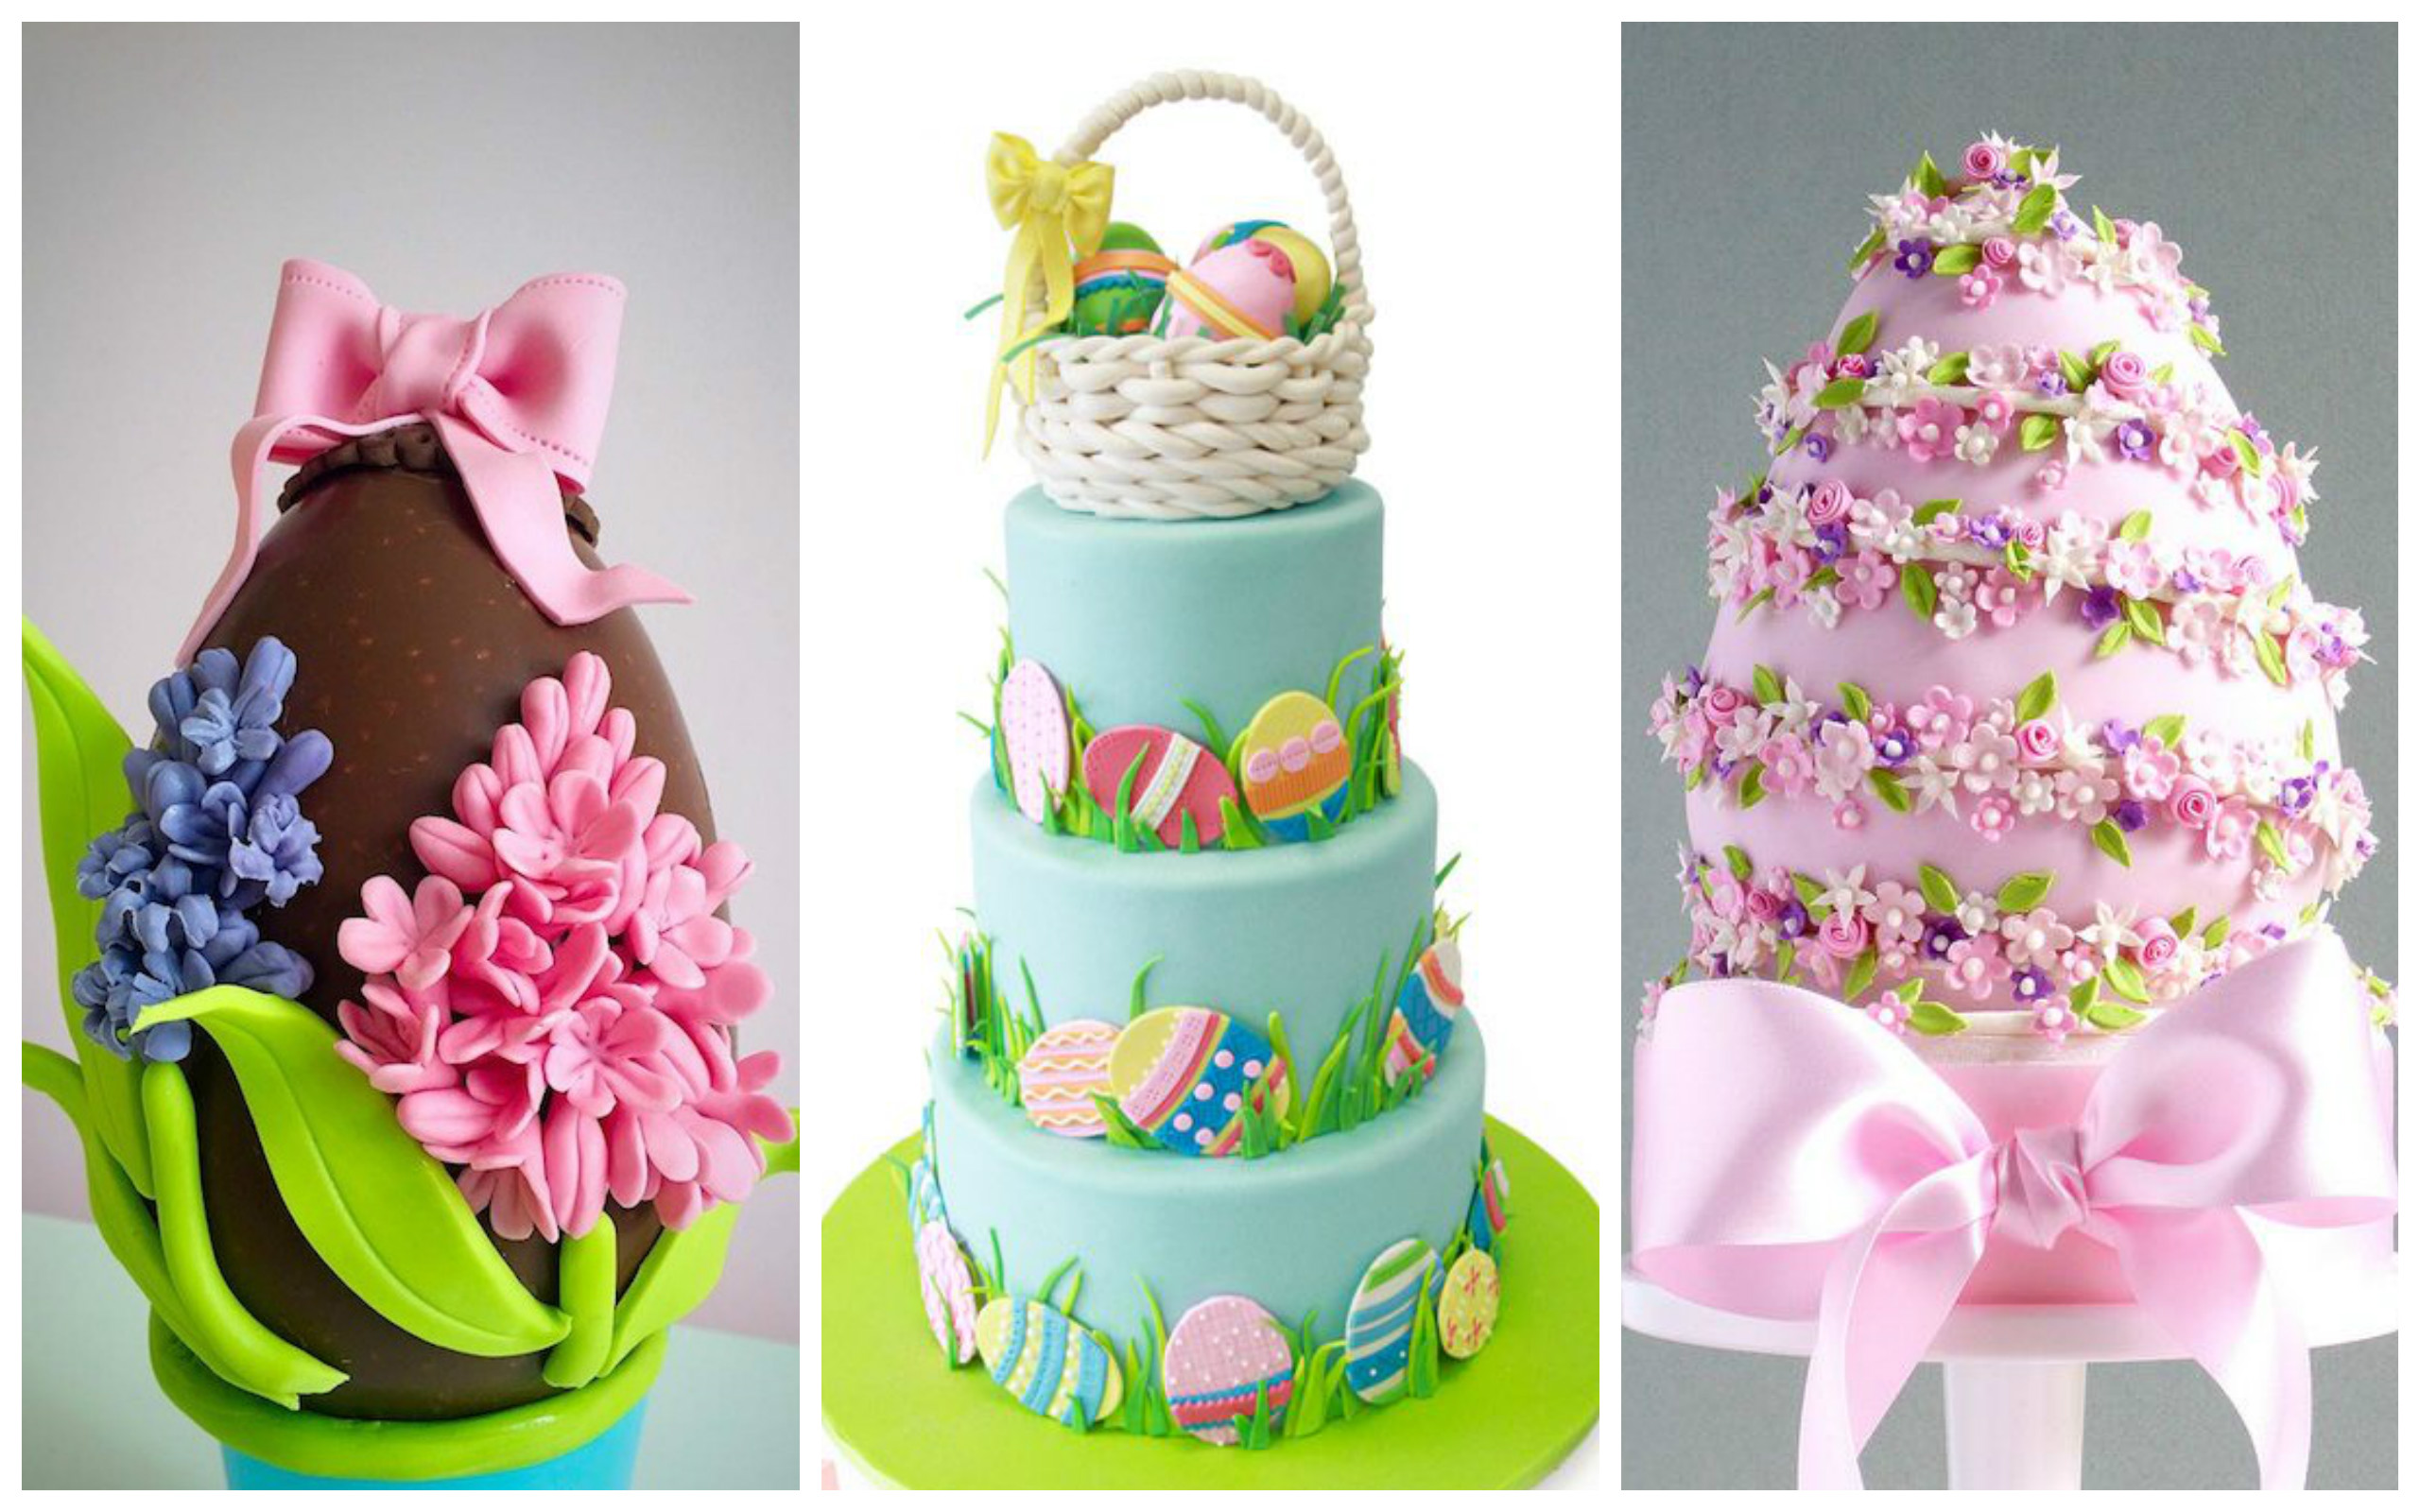 Aggregate 150+ amazing easter cakes best - in.eteachers